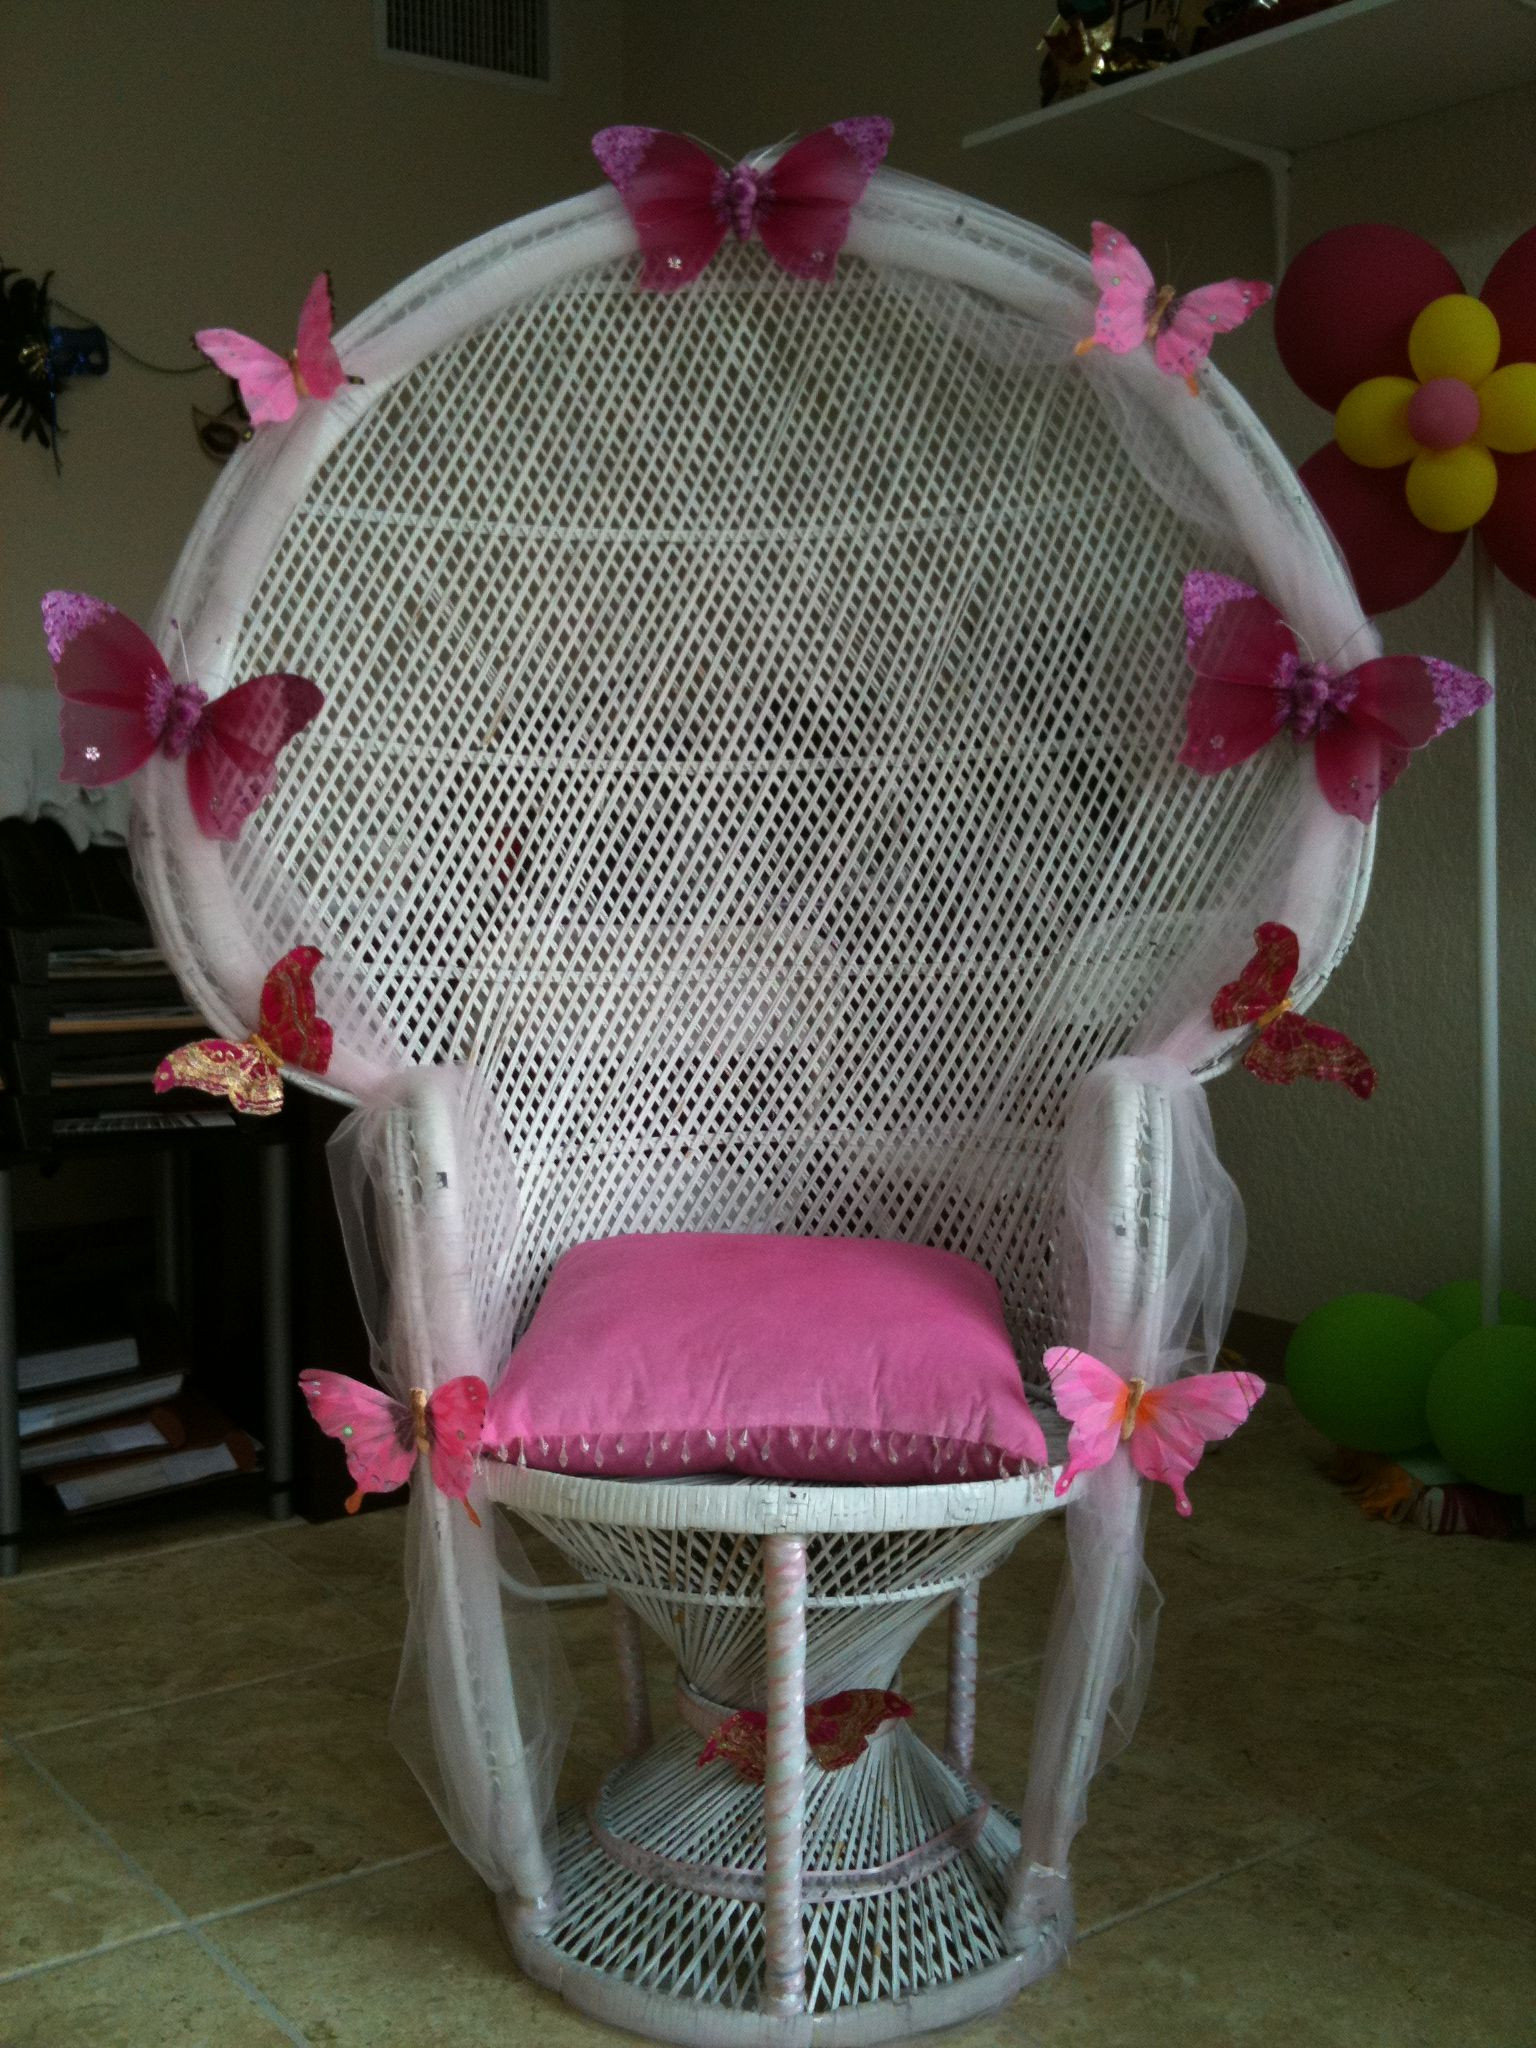 Baby Showers Decorations Ideas
 Nice Decoration Ideas Baby Shower Mother s Chair